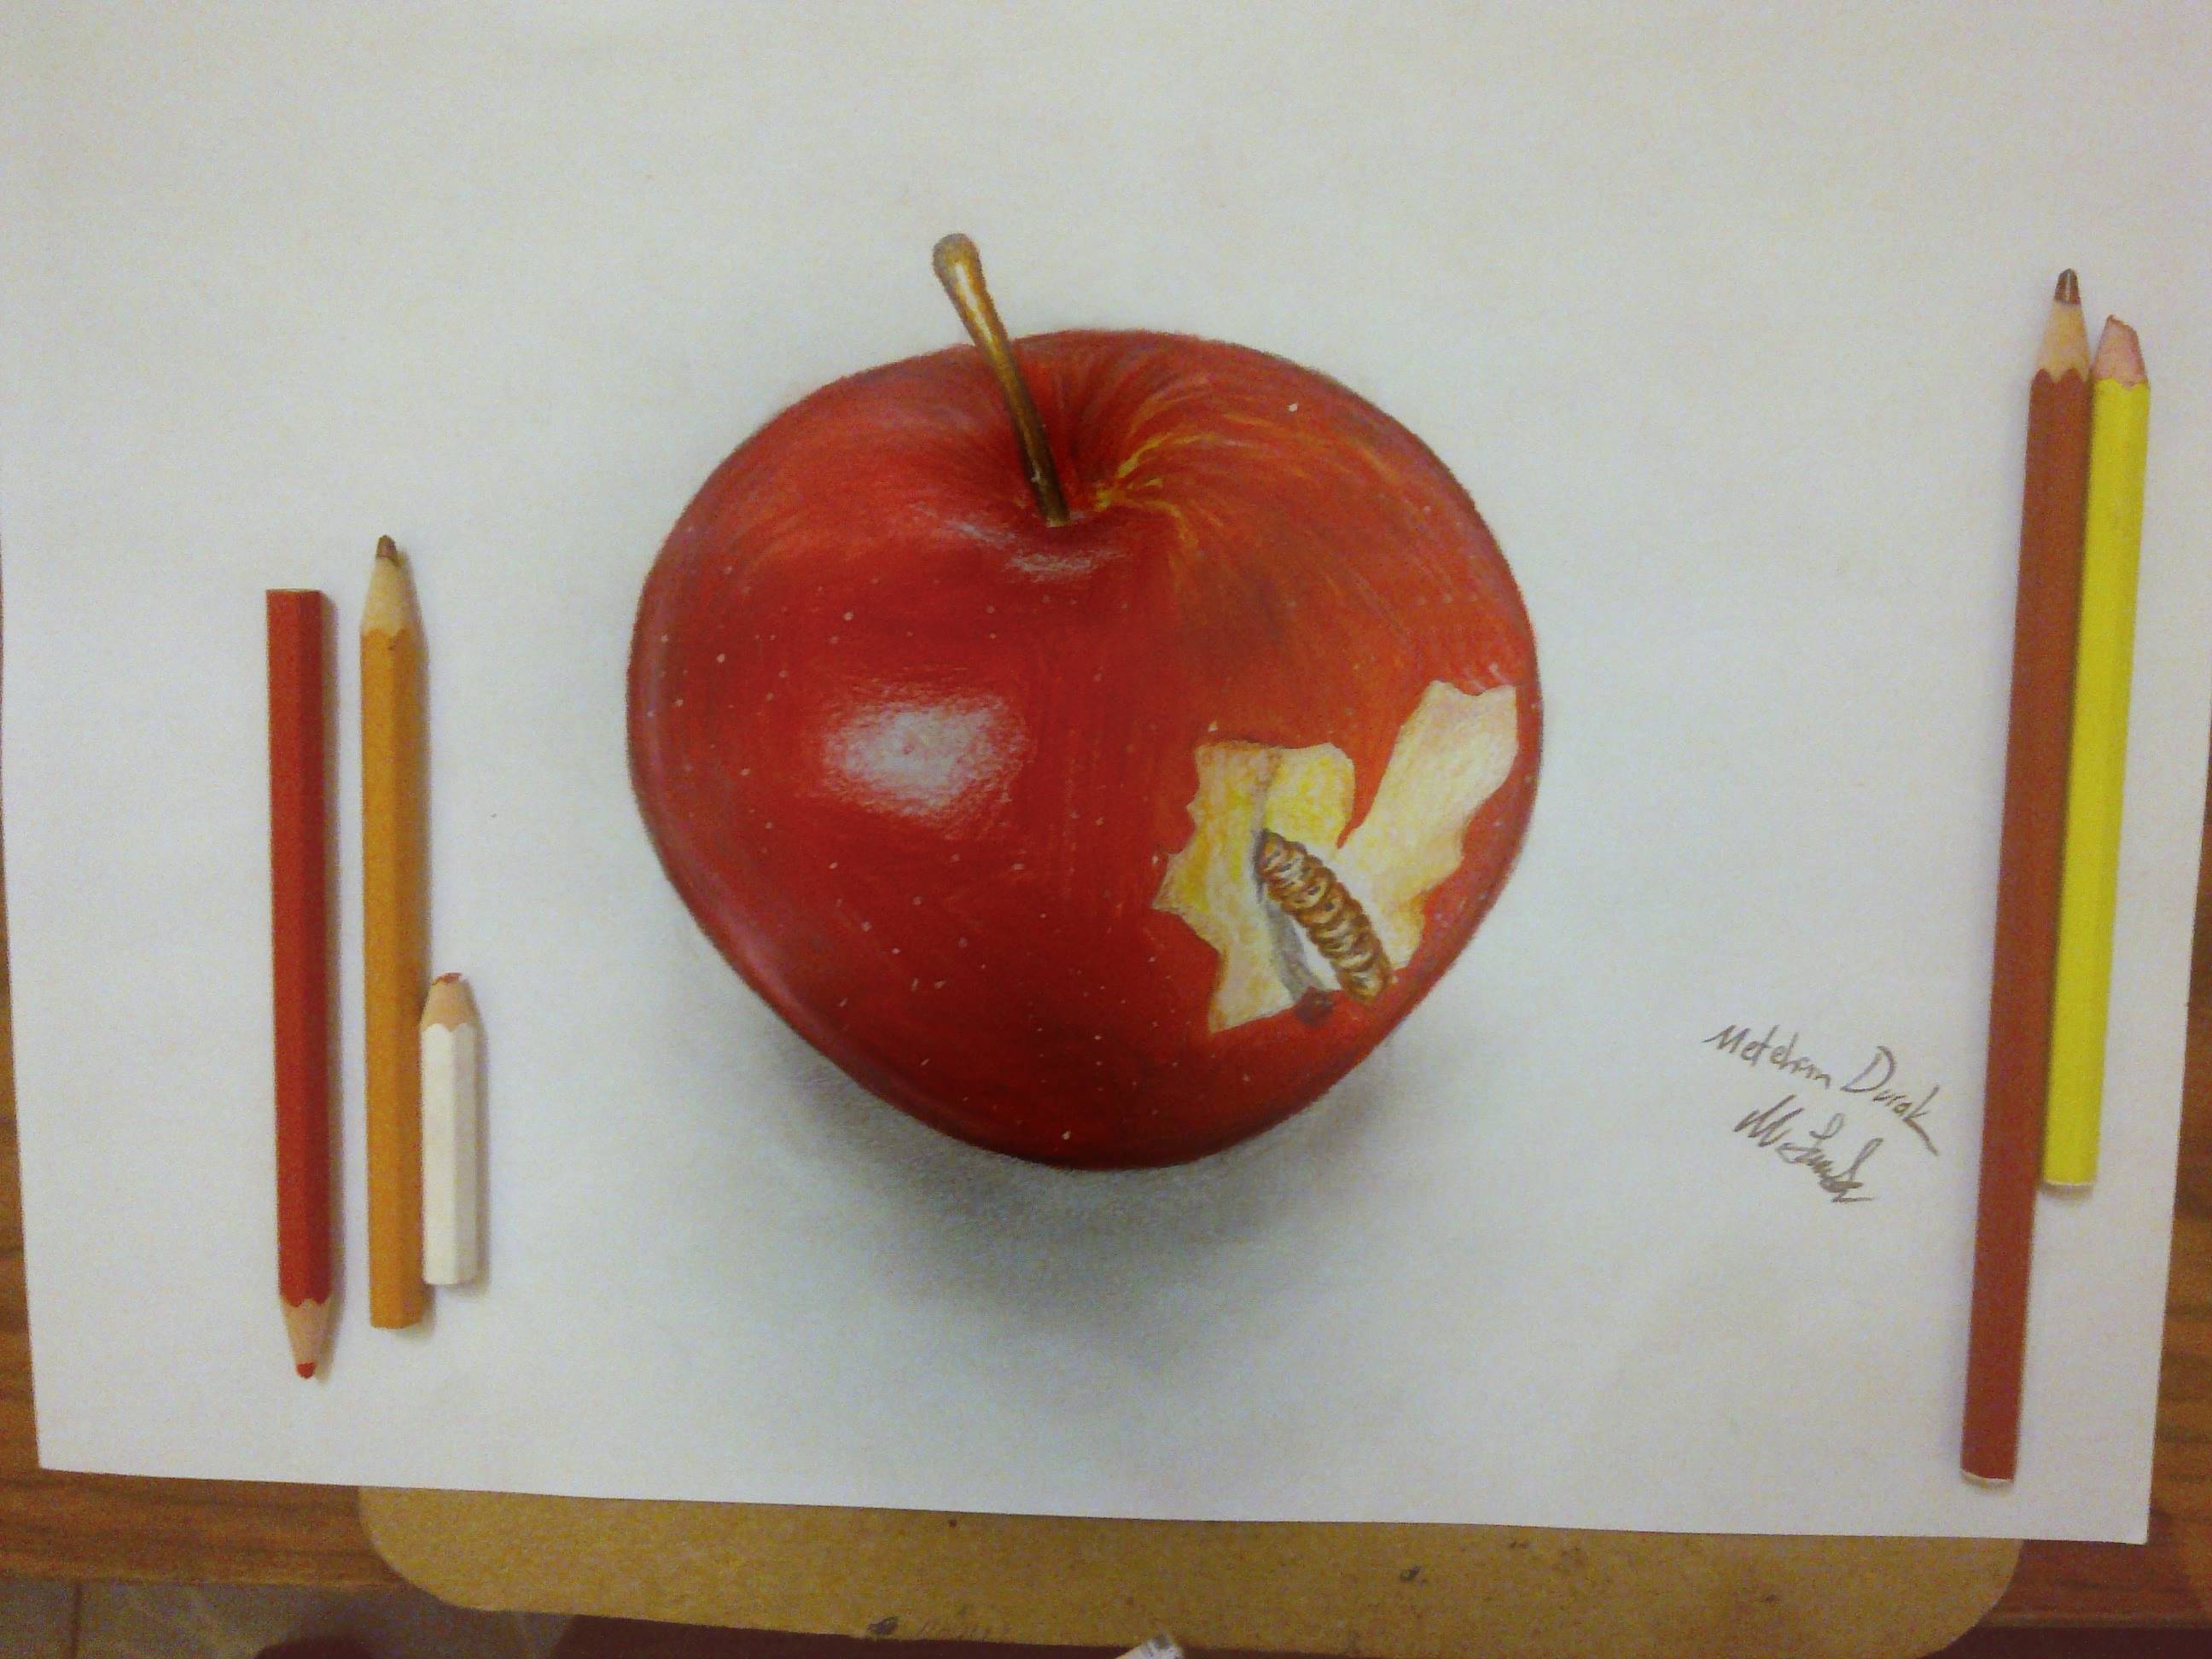 Been Person Has Drawing An Apple On A Piece Of Paper Backgrounds | JPG Free  Download - Pikbest